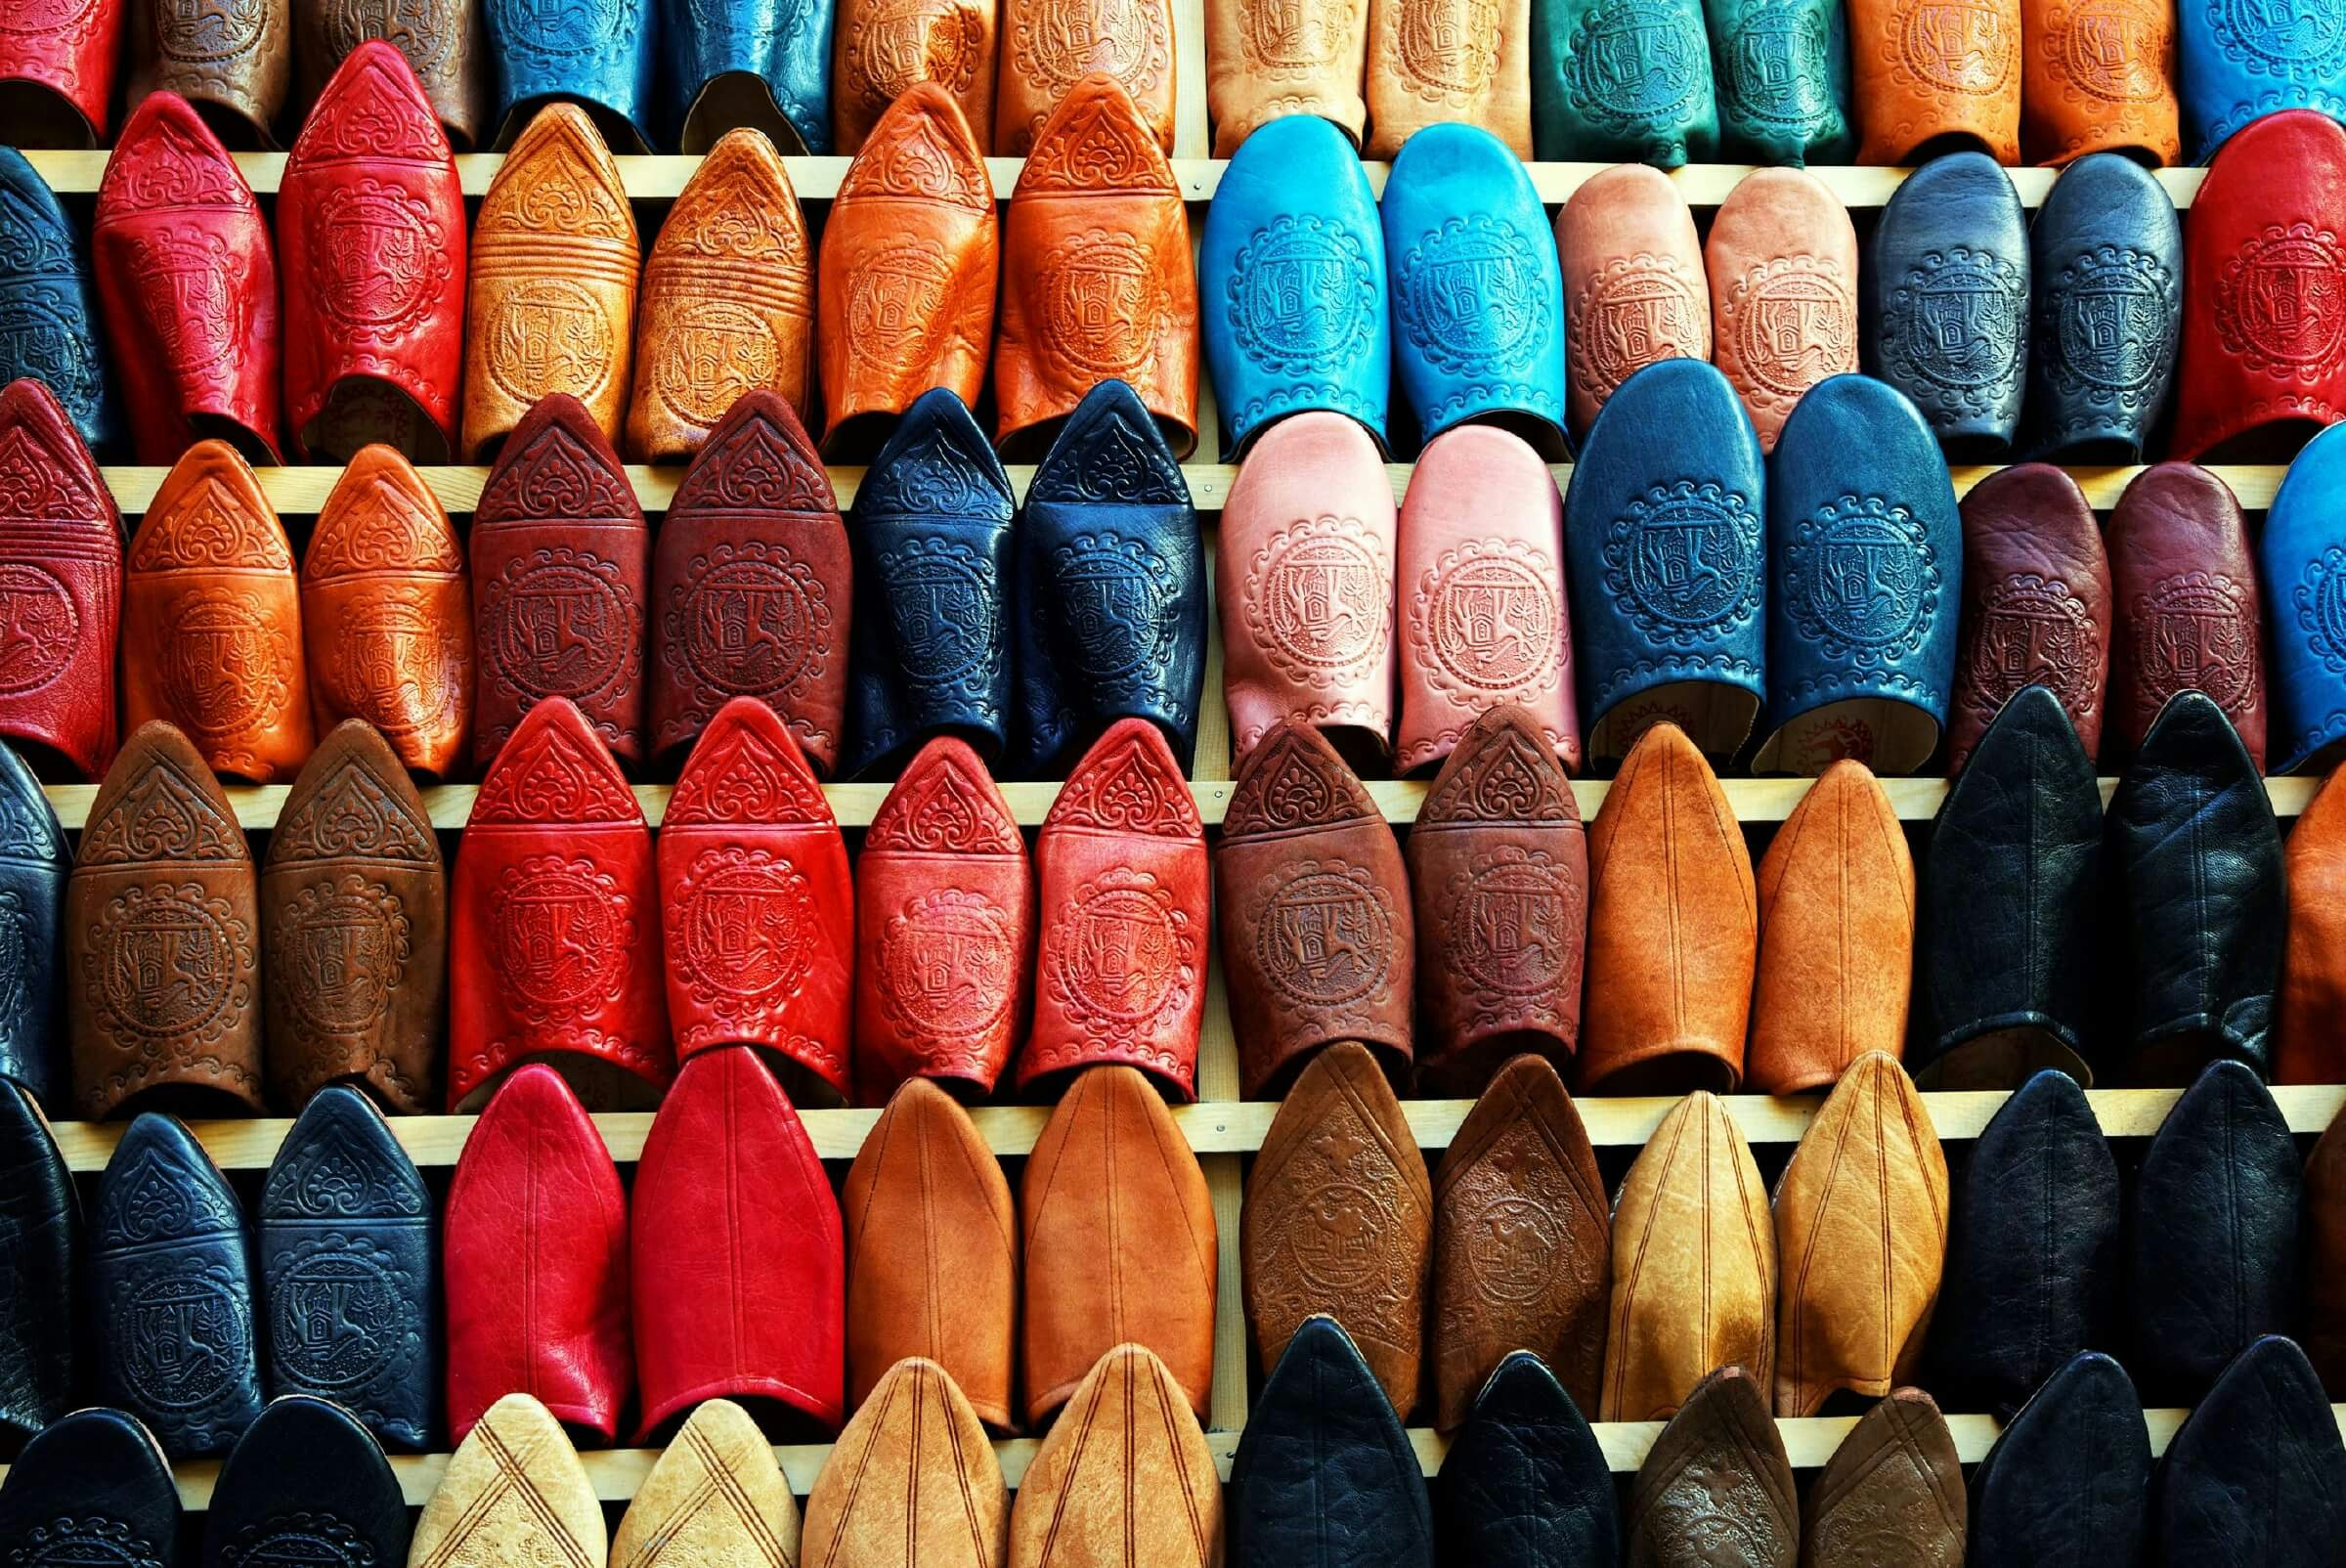 Dozens of pairs of leather slippers in all different colours on display in Marrakesh.